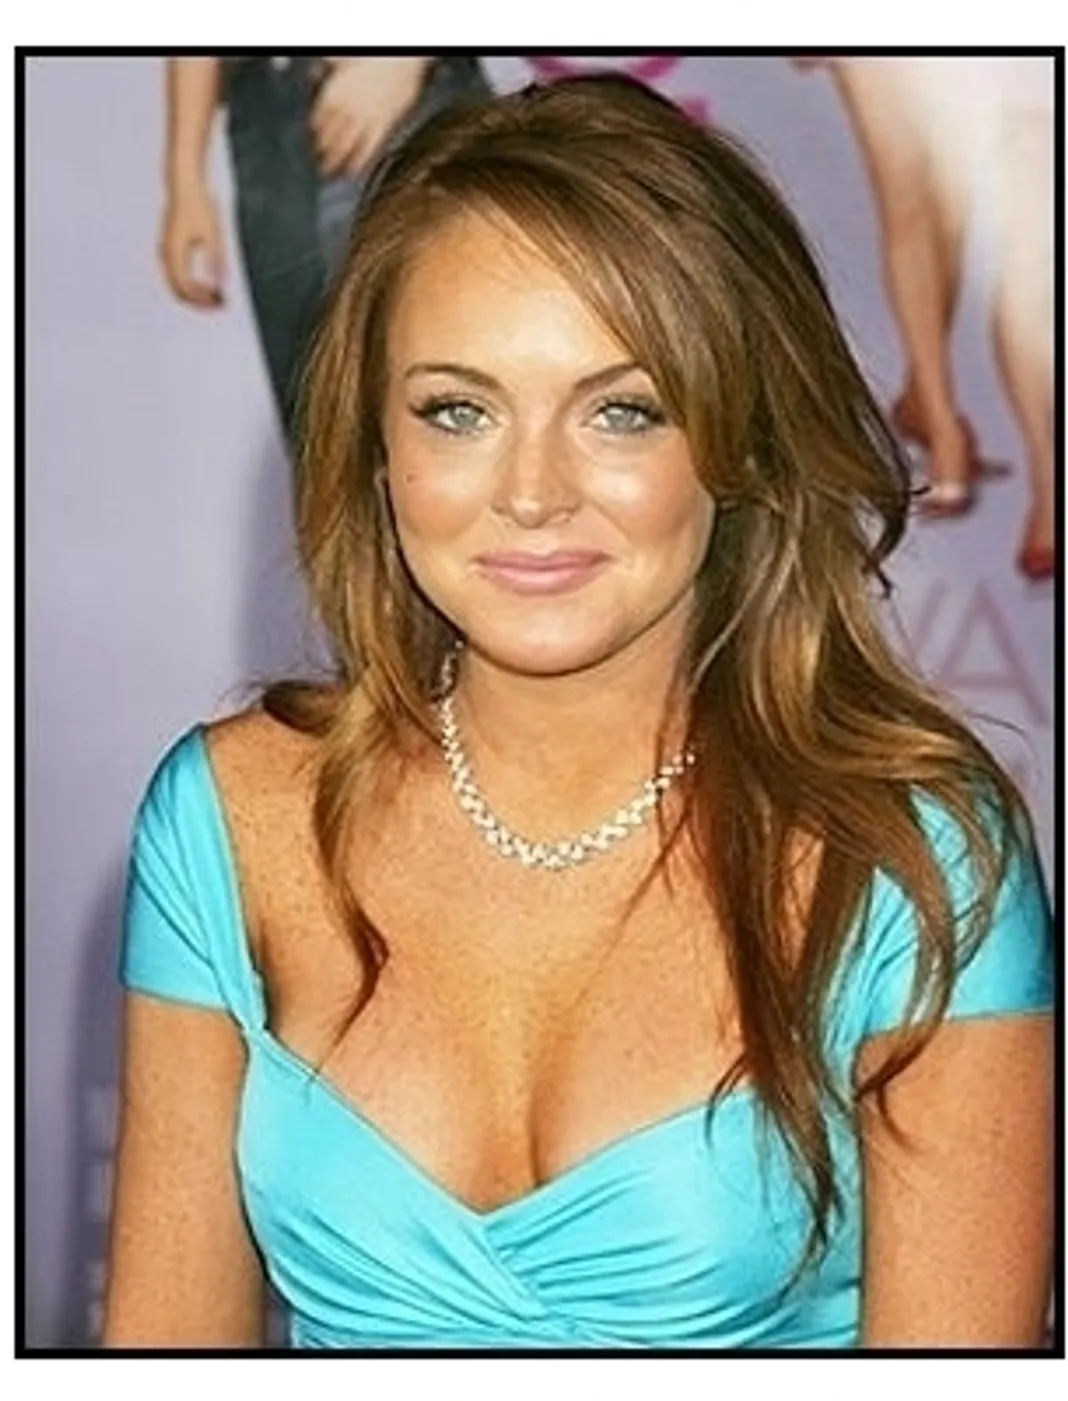 angie marie dion recommends lindsay lohan big boobs pic